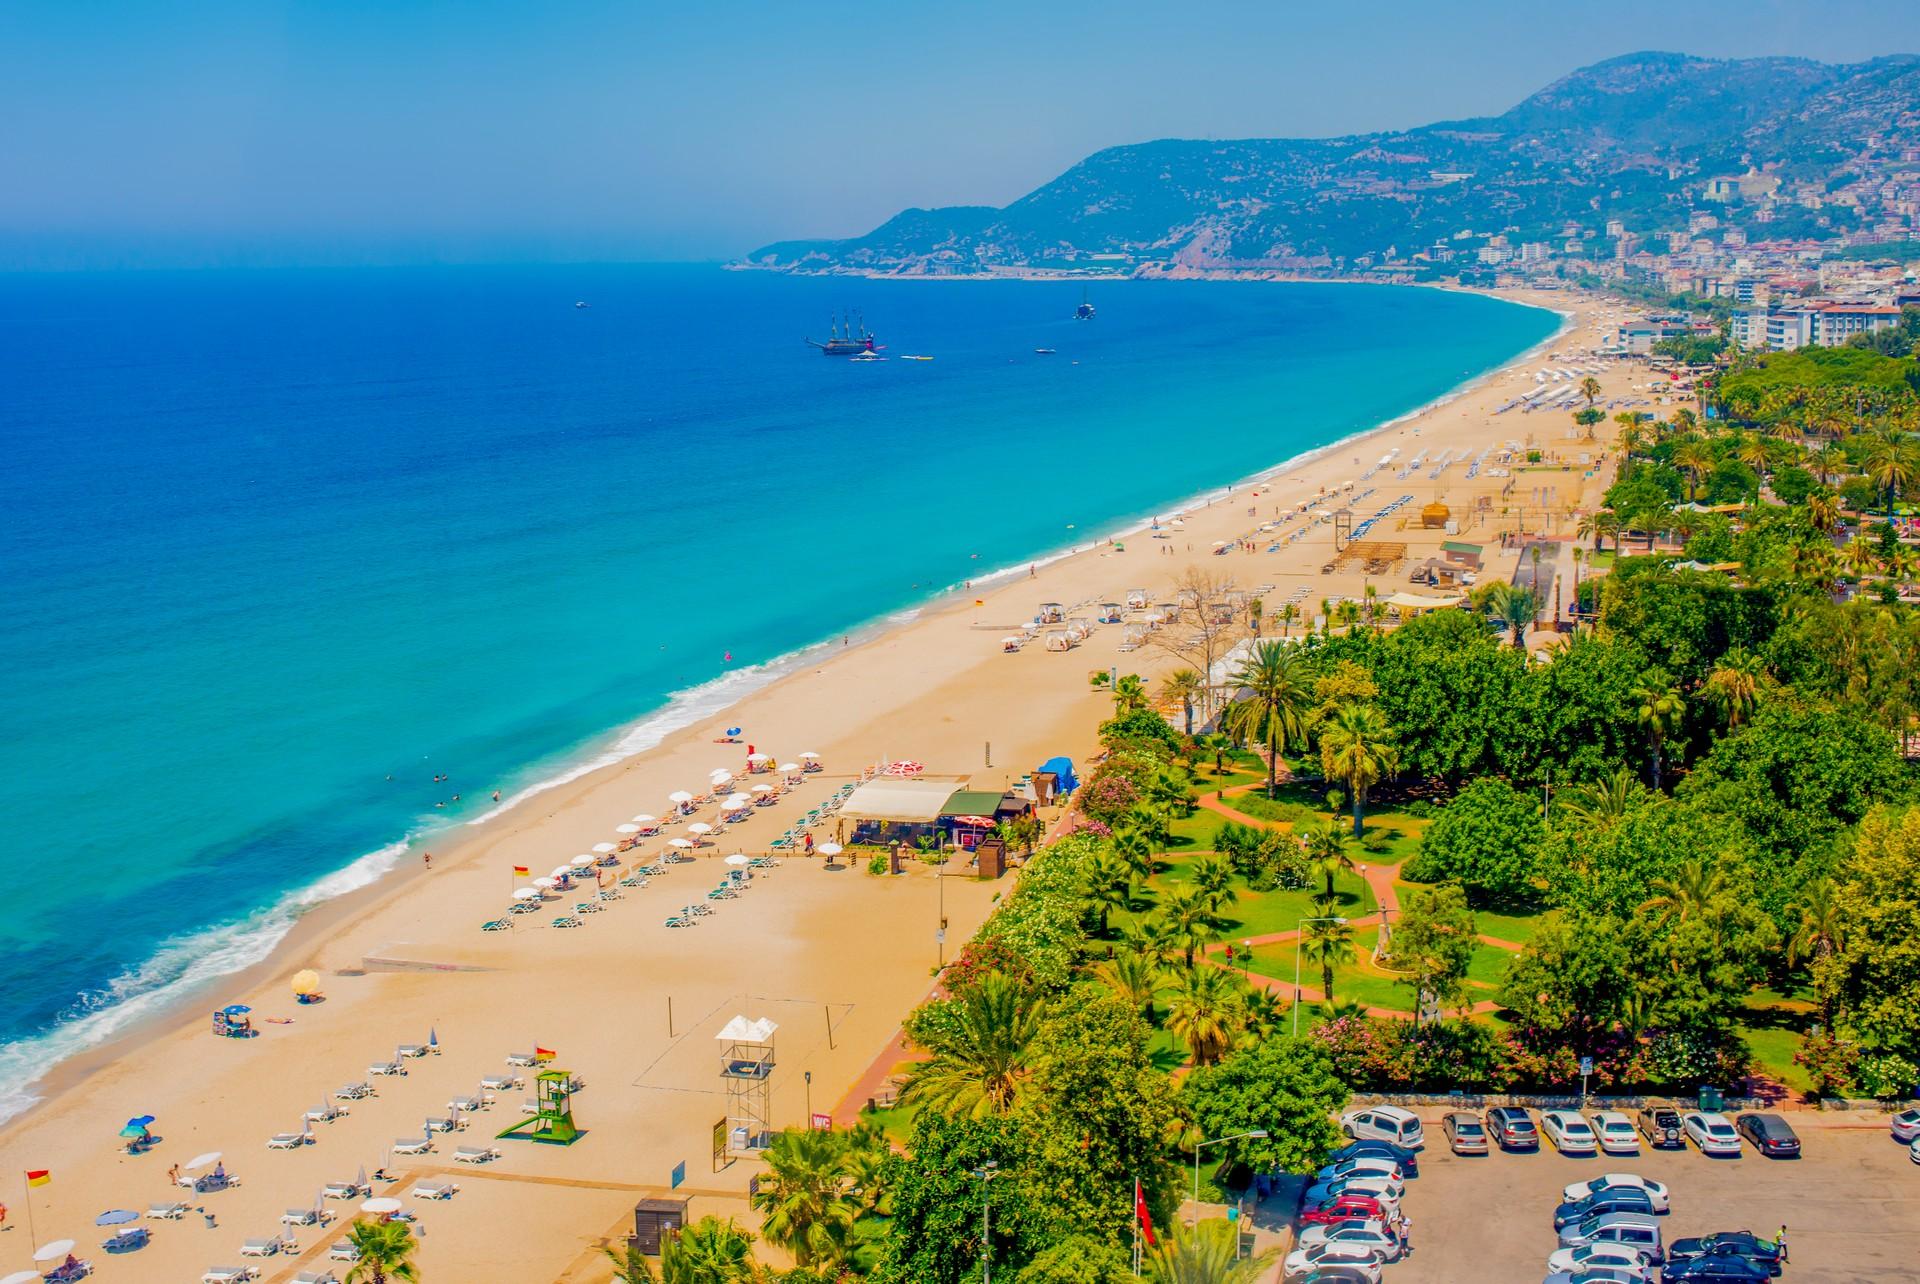 Aerial view of people on the beach in Alanya on a clear sky day